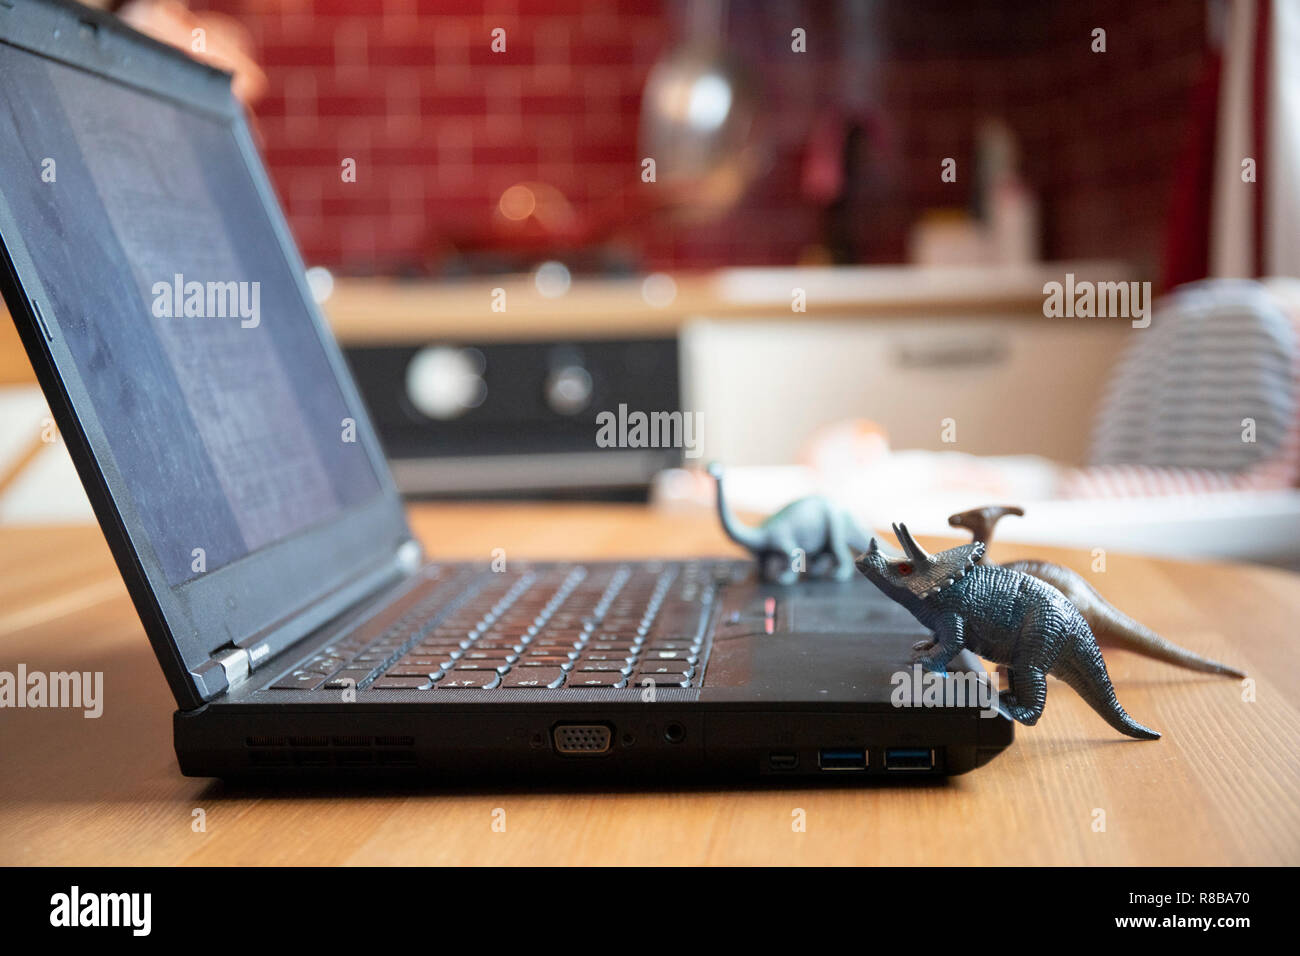 Open laptop on wooden table with small dinosaur toys that seem looking at the screen. Natural light. Side view. Stock Photo